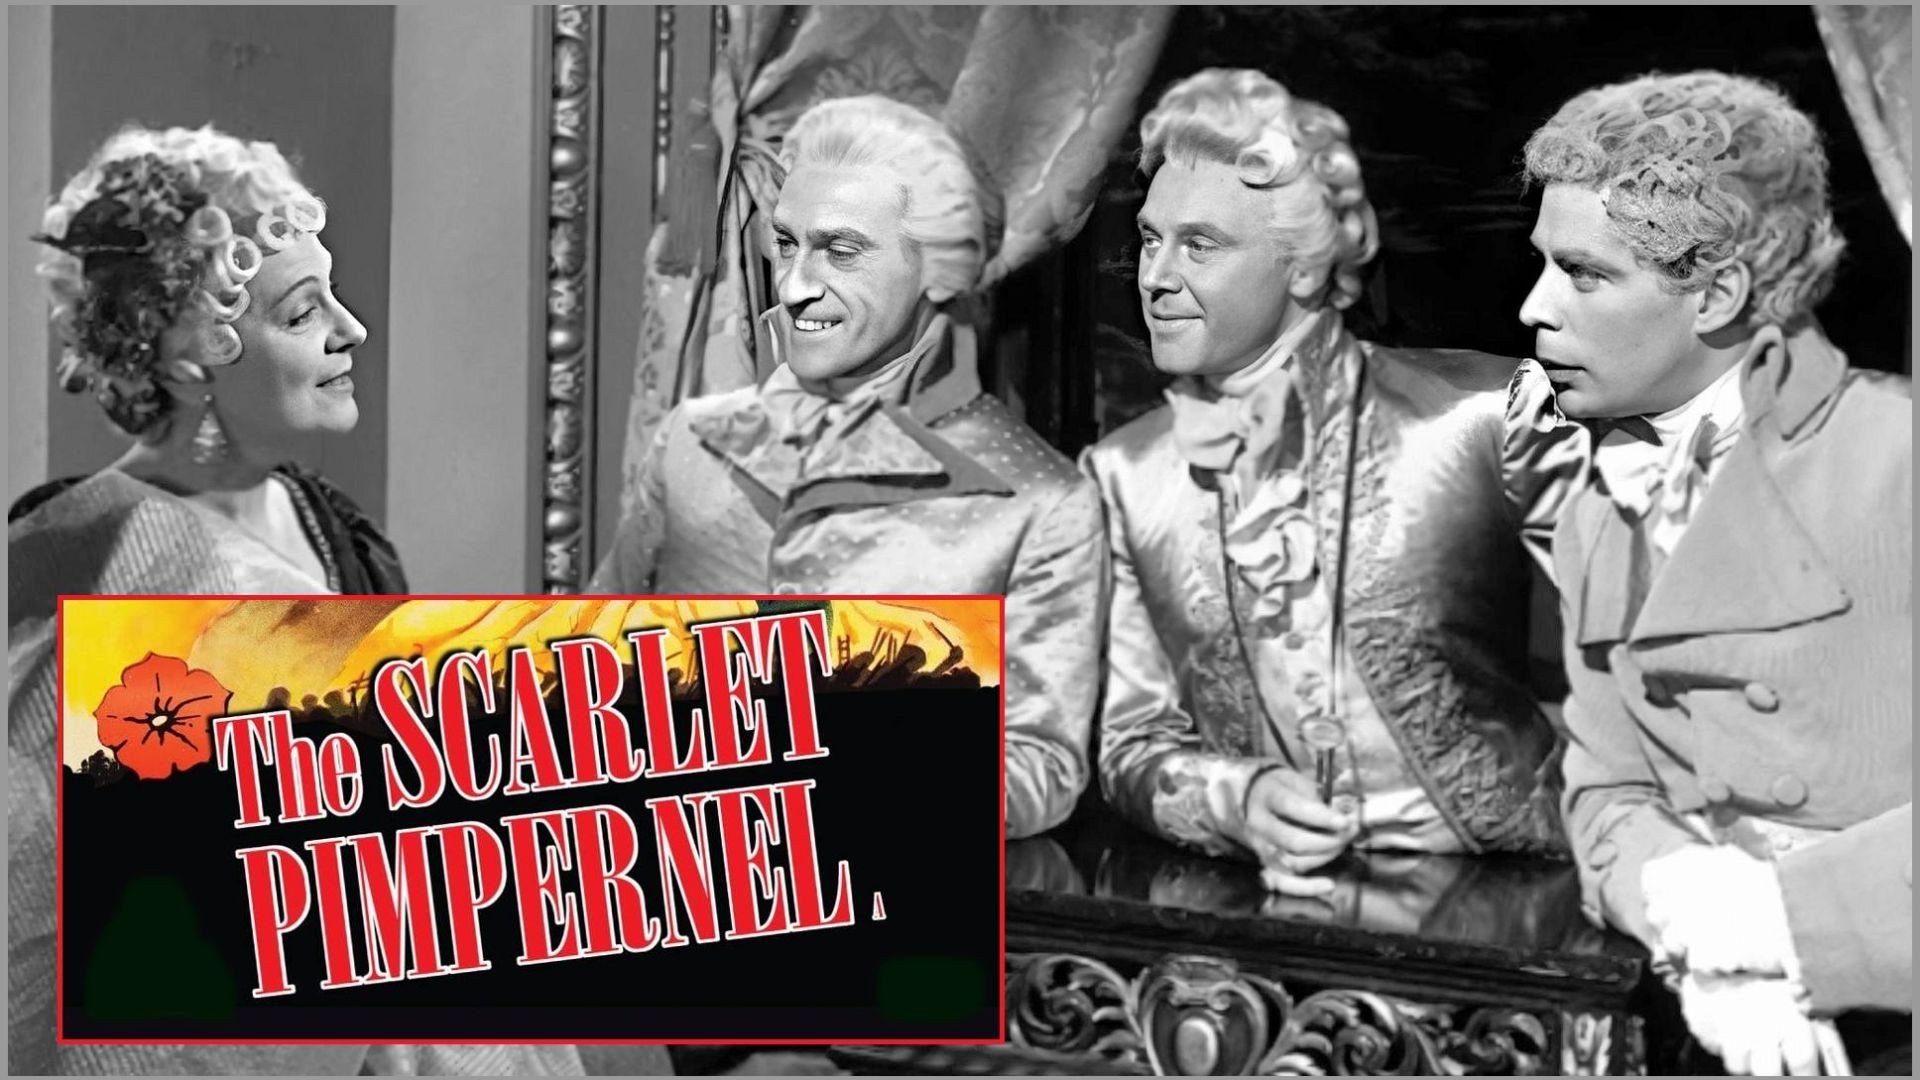 The Scarlet Pimpernel - Something Remembered